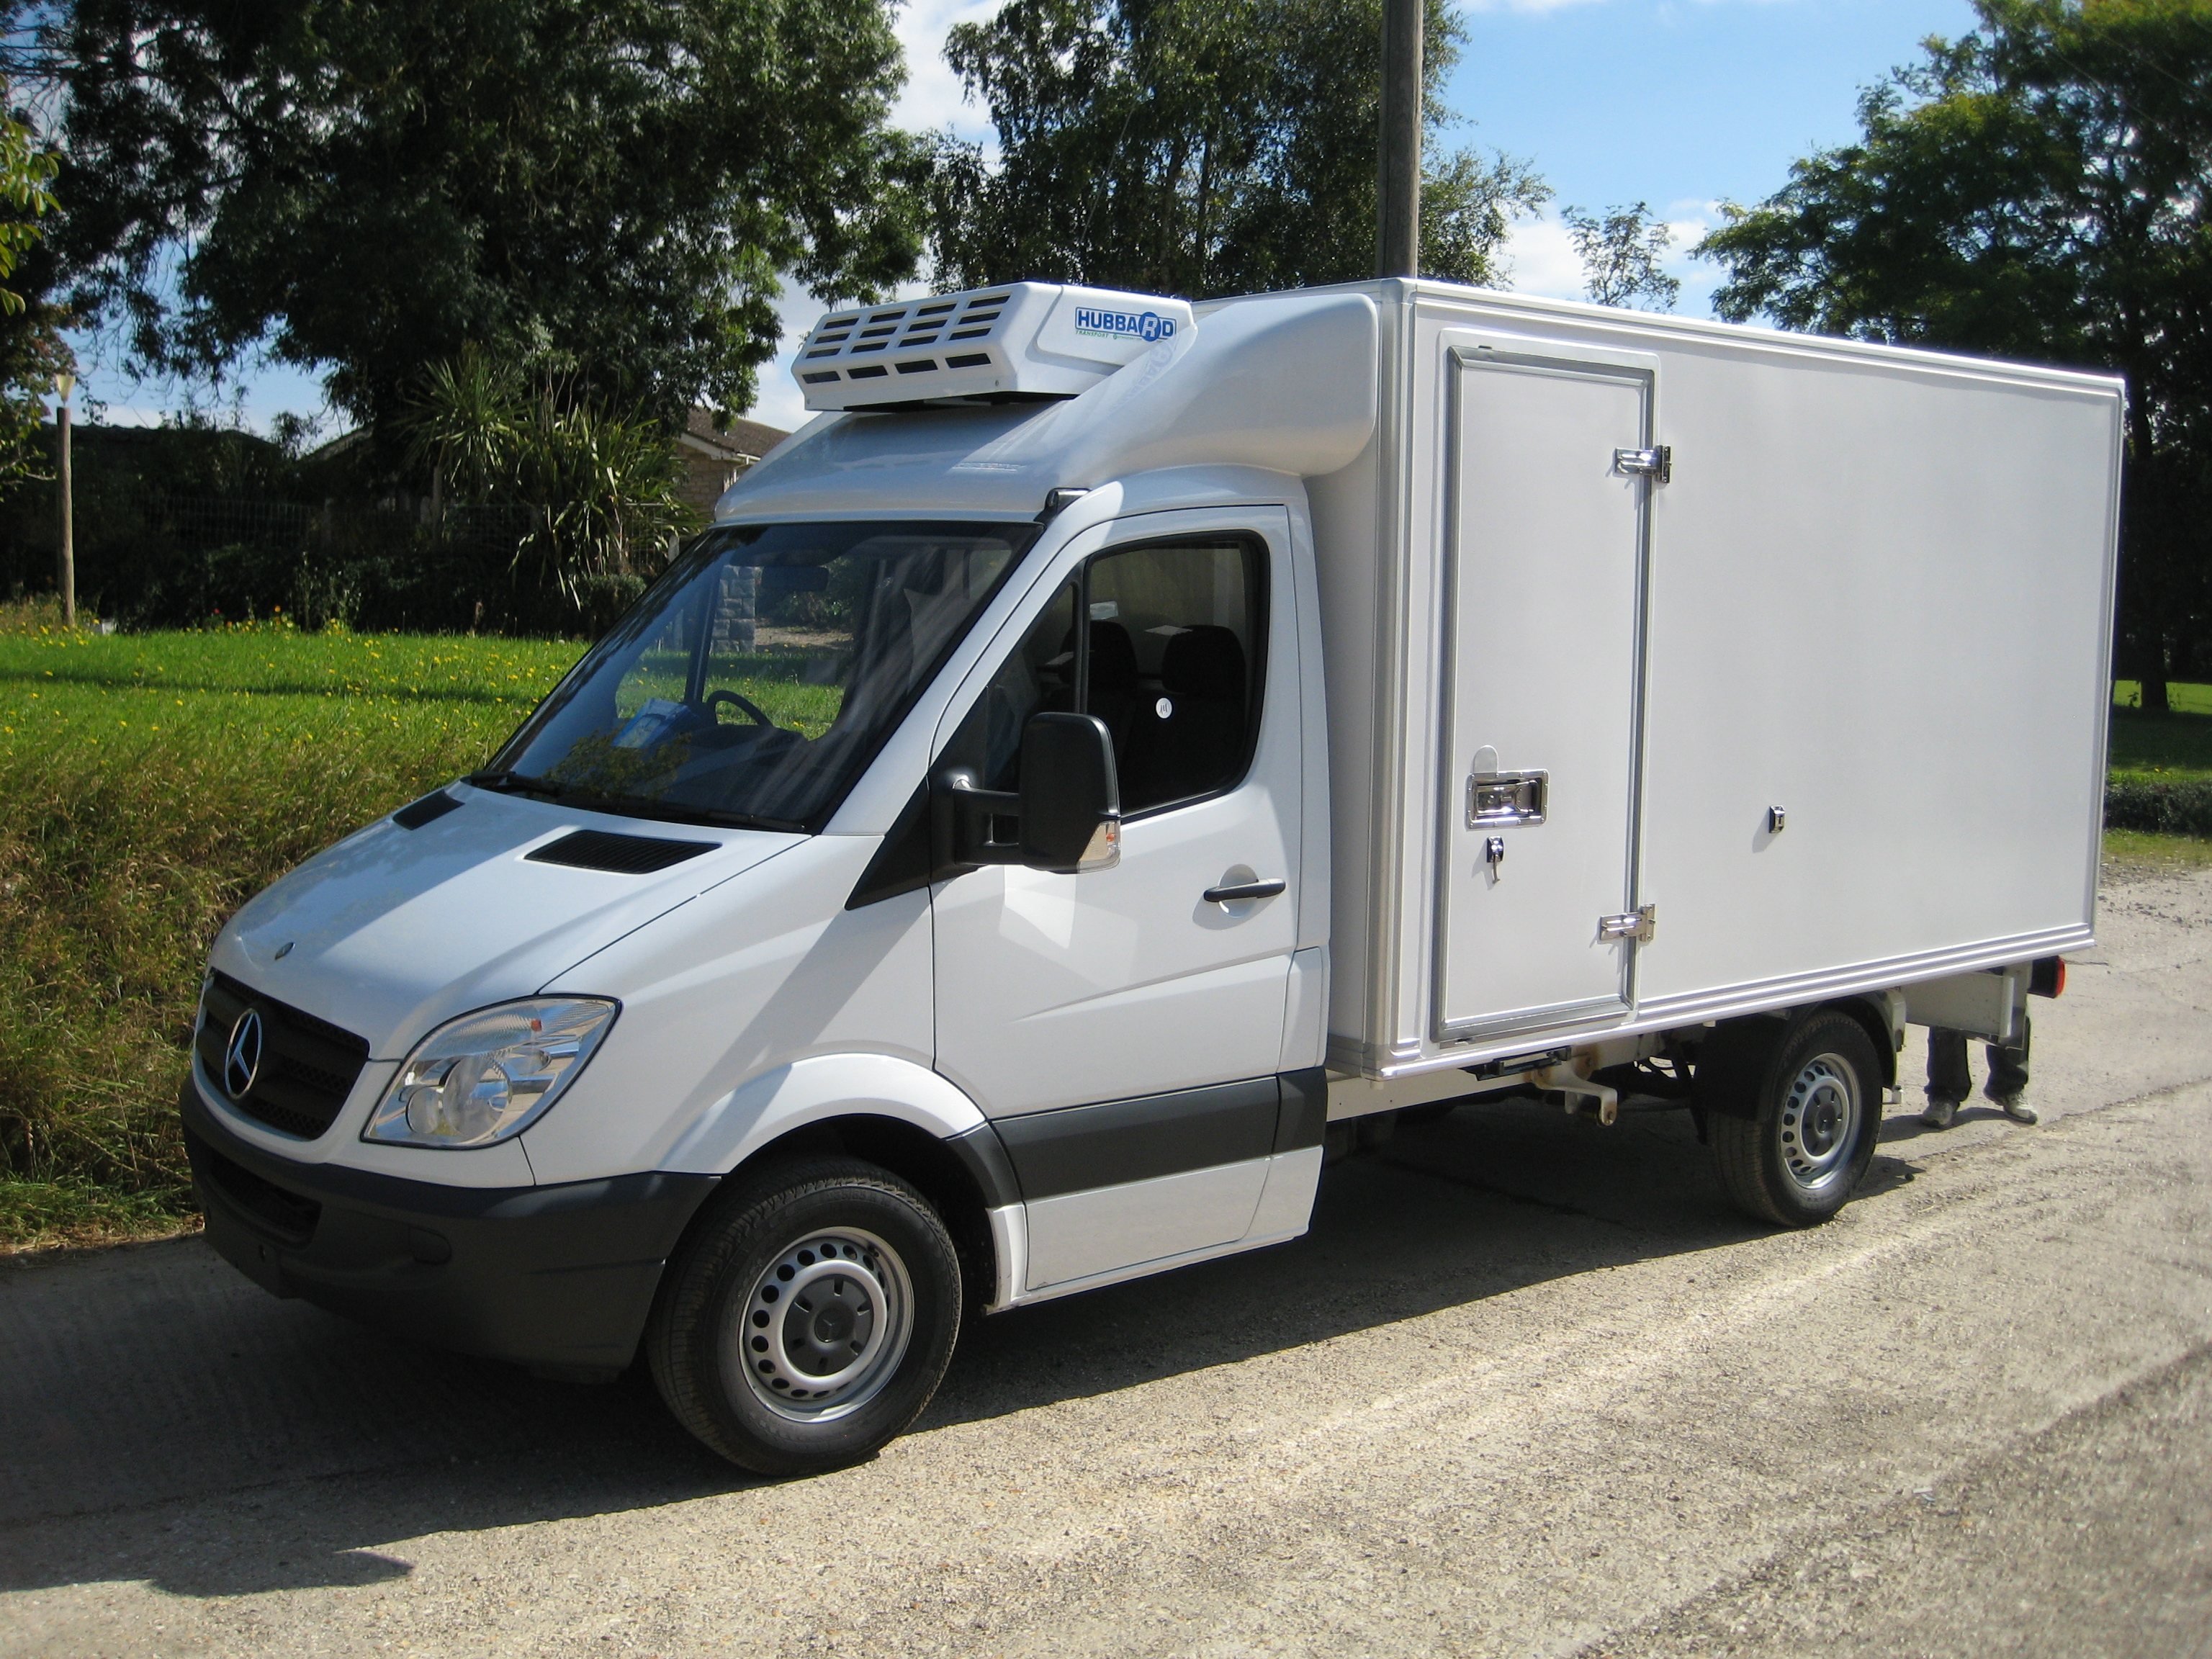 refrigerated van for sale uk